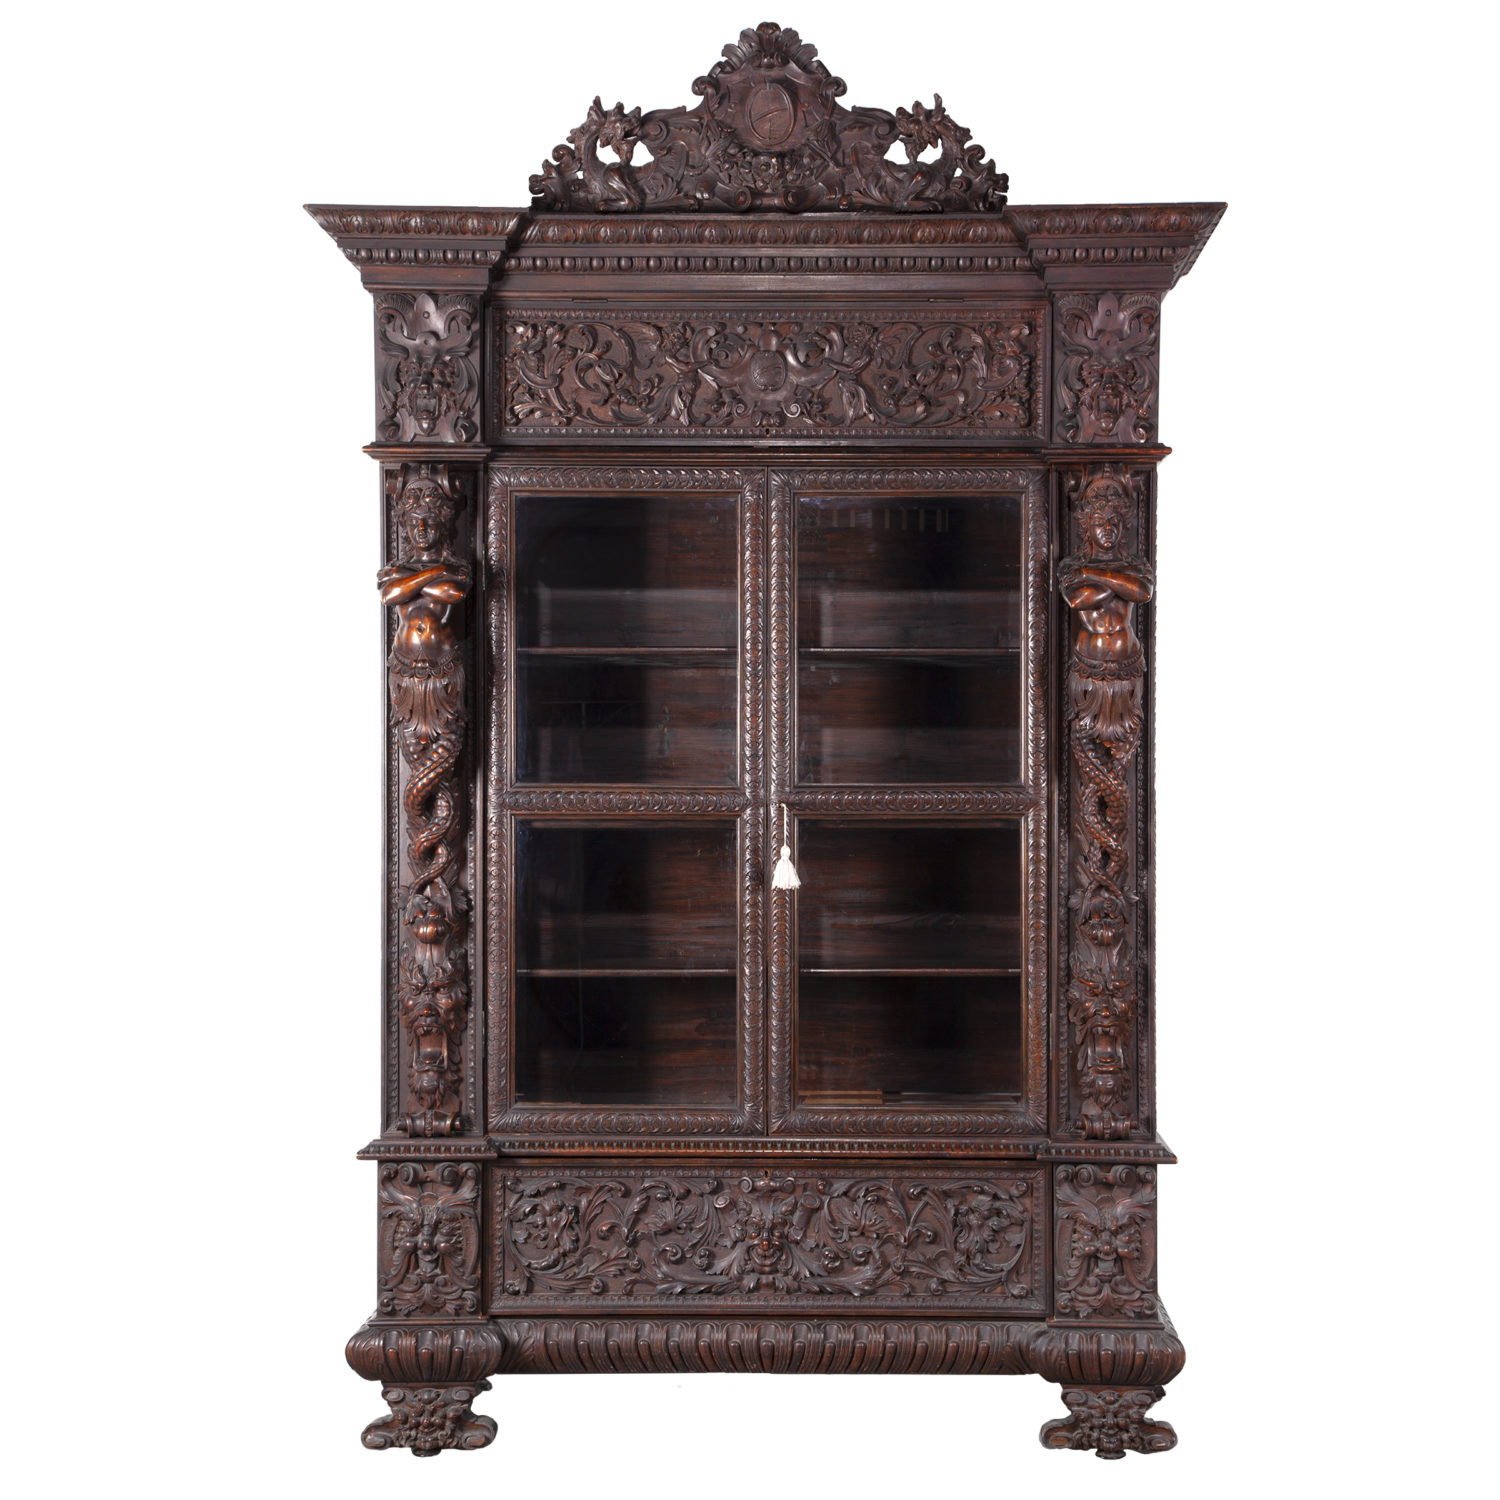 Lot: 108 R.J. Horner Bookcase (Price Realized with Buyers Premium: $10,800